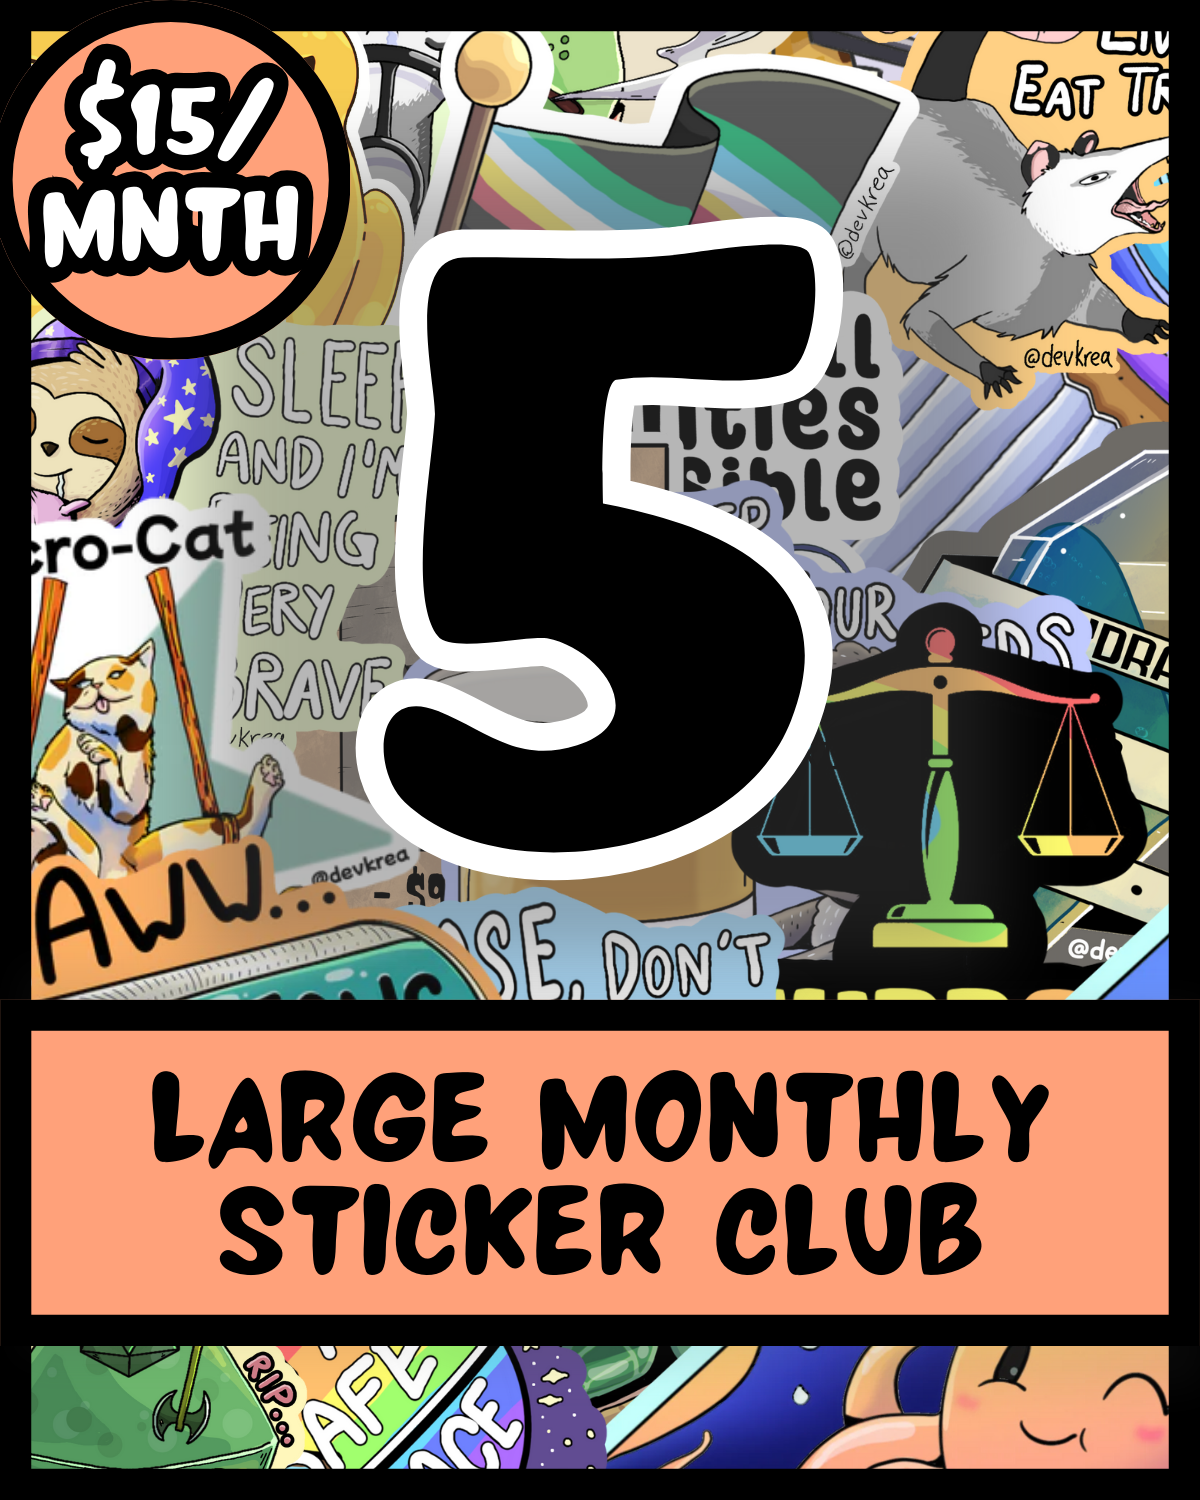 Large Monthly Sticker Collection Club | Deviant Kreations - Deviantkreations